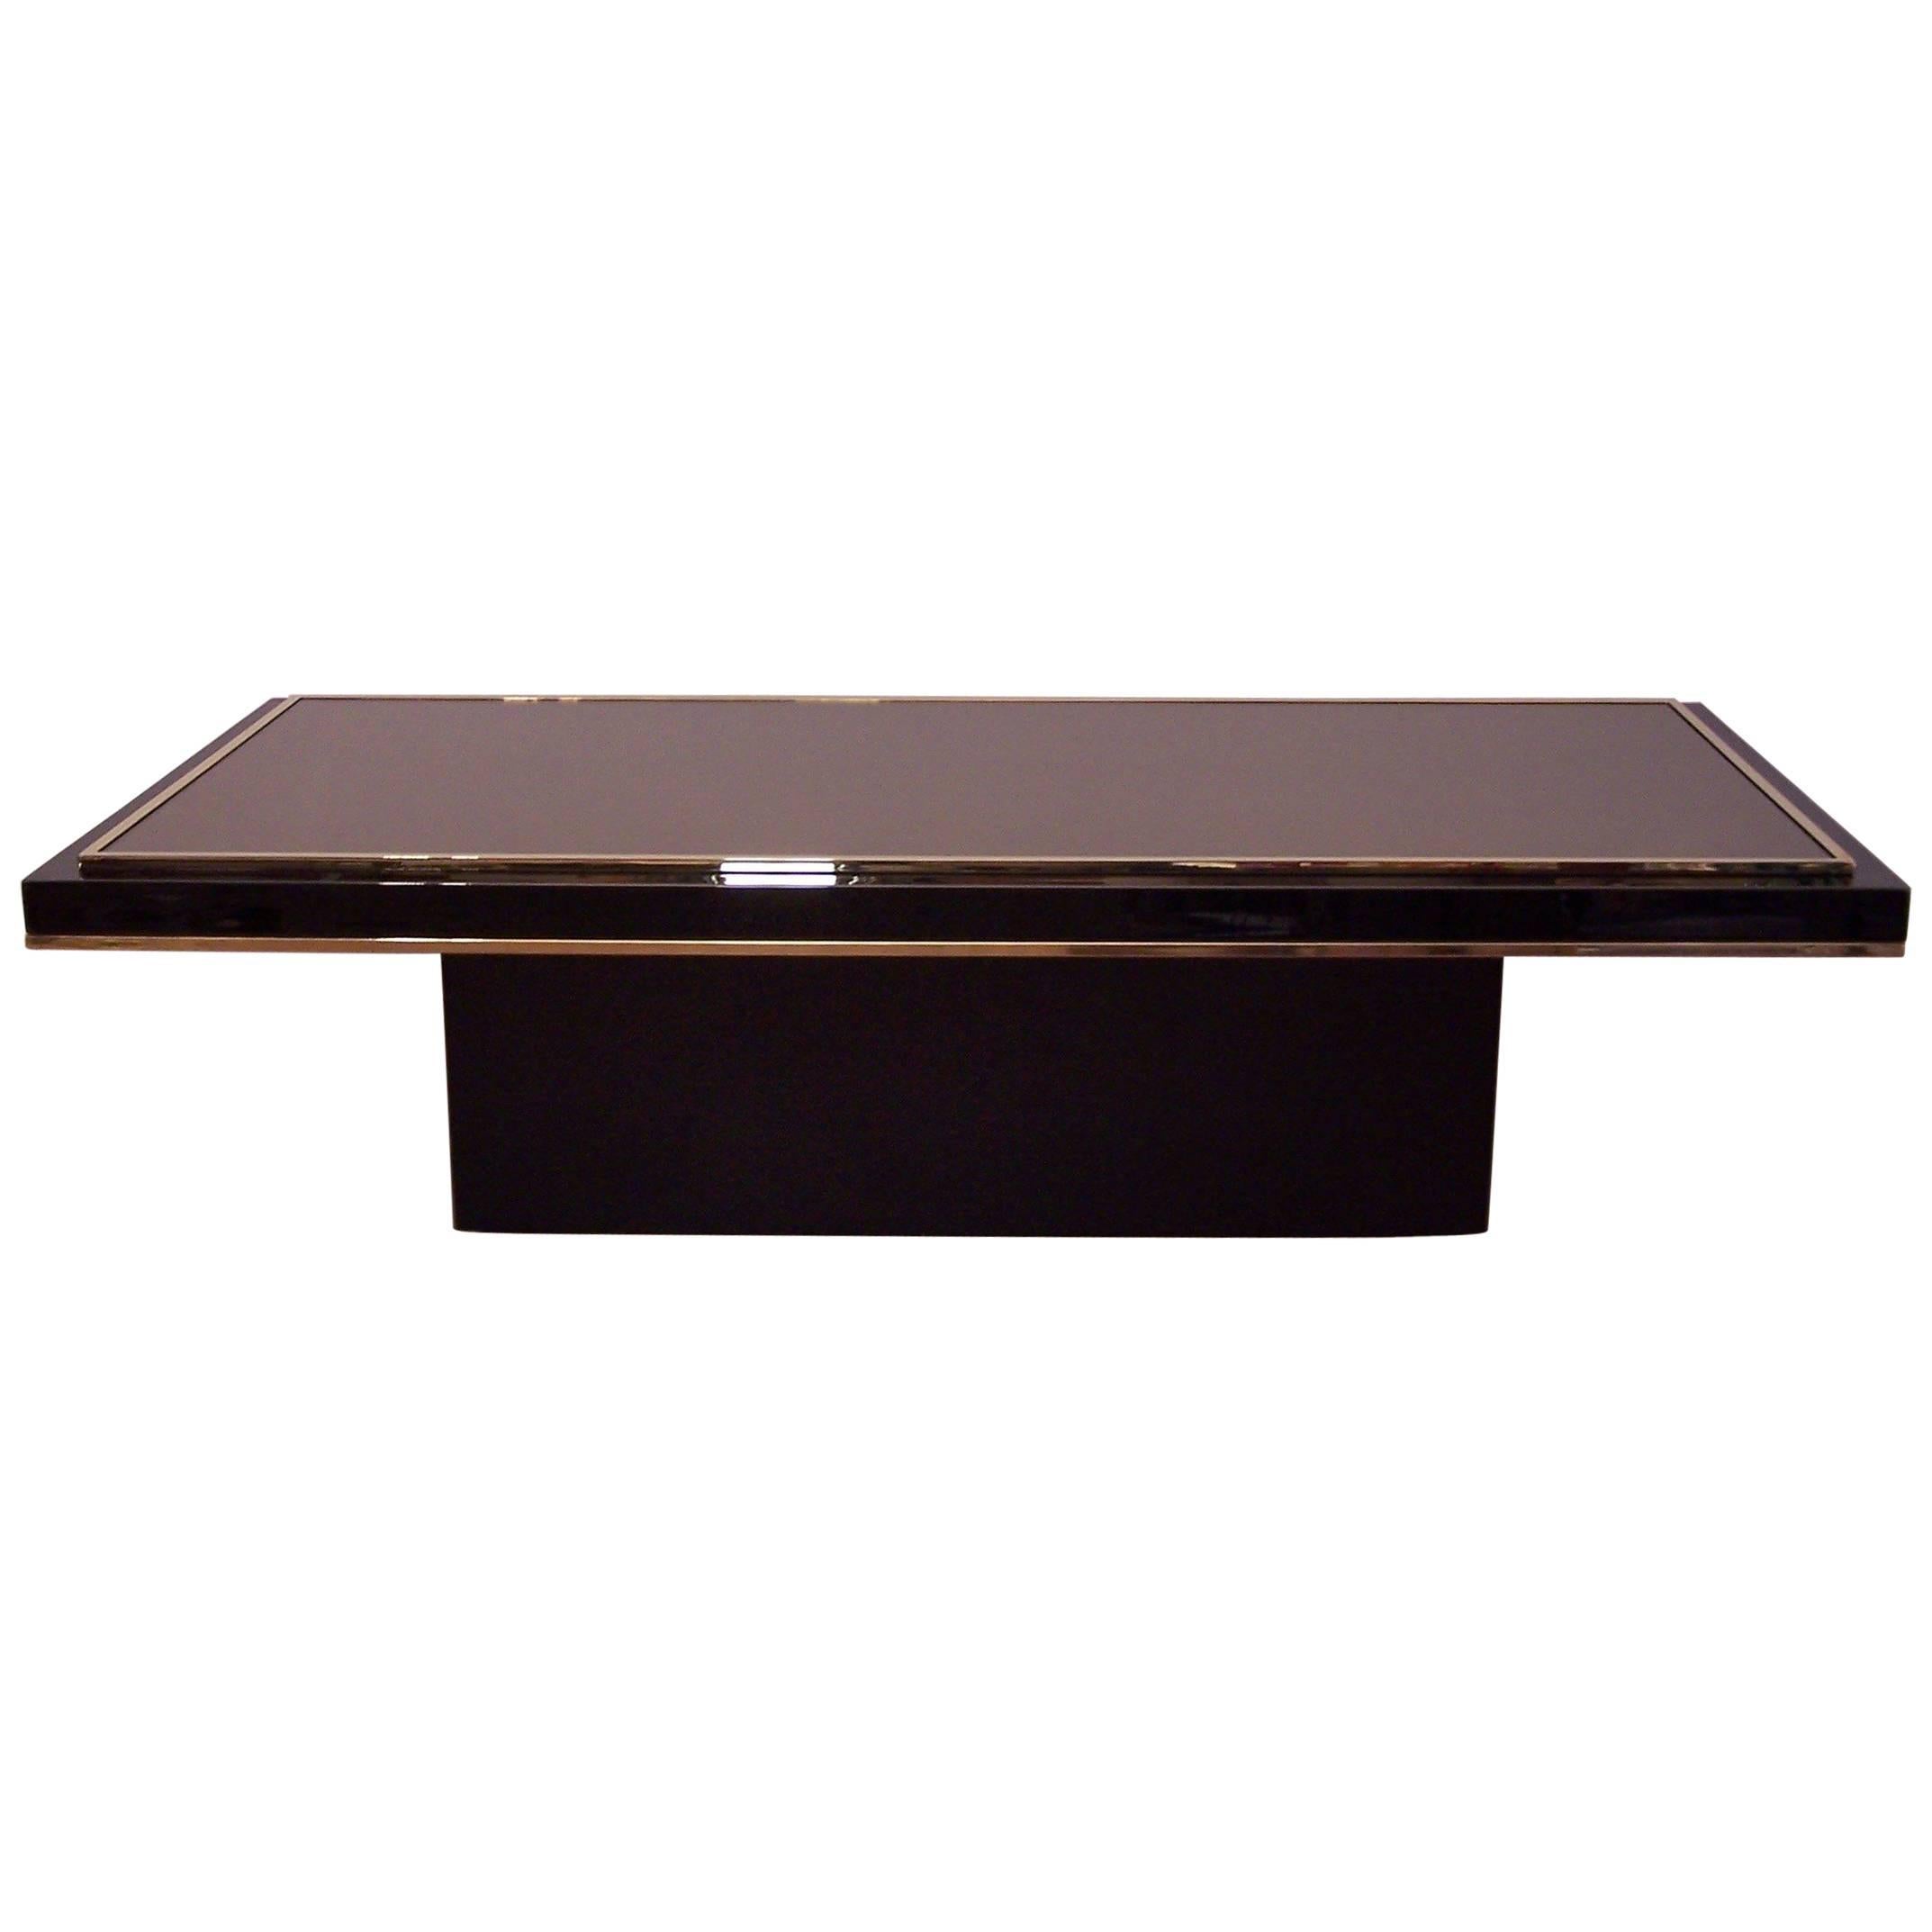 Dutch Design and Gold Coffee Table with Fine Gold 23-Carat by Roger Vanhevel